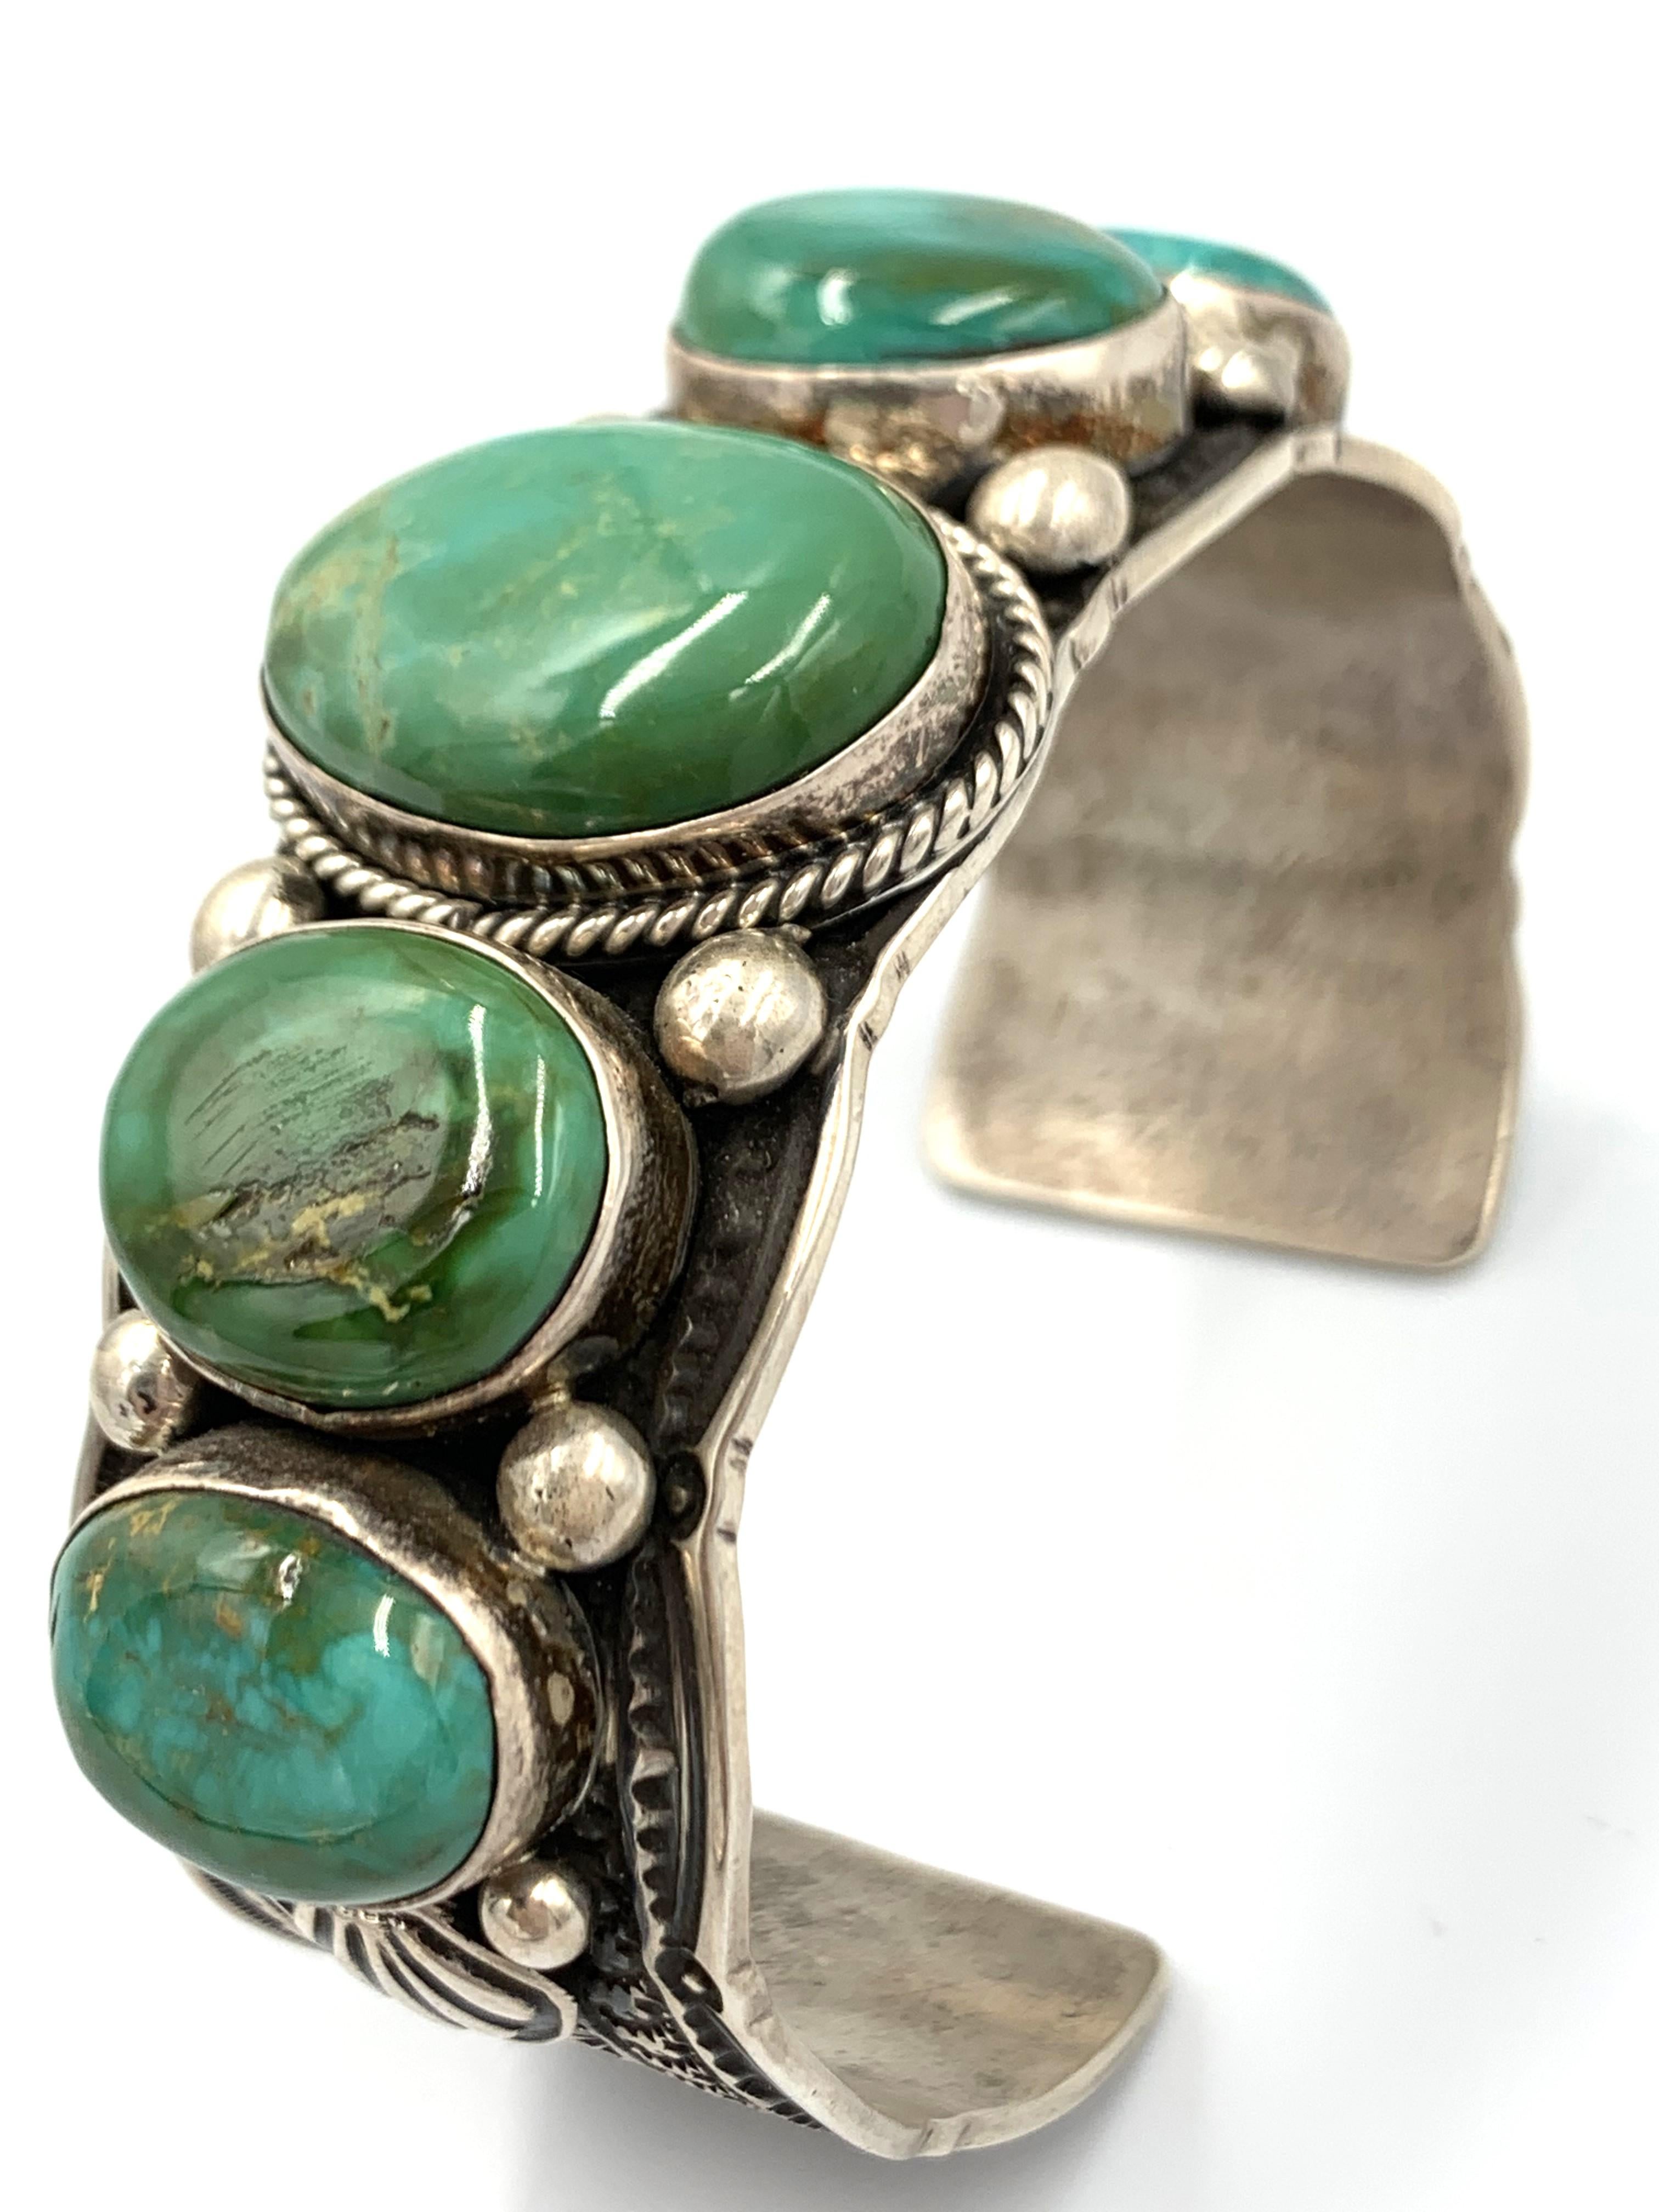 This is a collaborative piece by Guy Hoskie and Bruce Eckhardt. The silverwork was done by Guy Hoskie and the stones were sourced, cut, and polished by Bruce Eckhardt.

The stamped and applique 1” sterling silver cuff has five Blue Gem Turquoise,